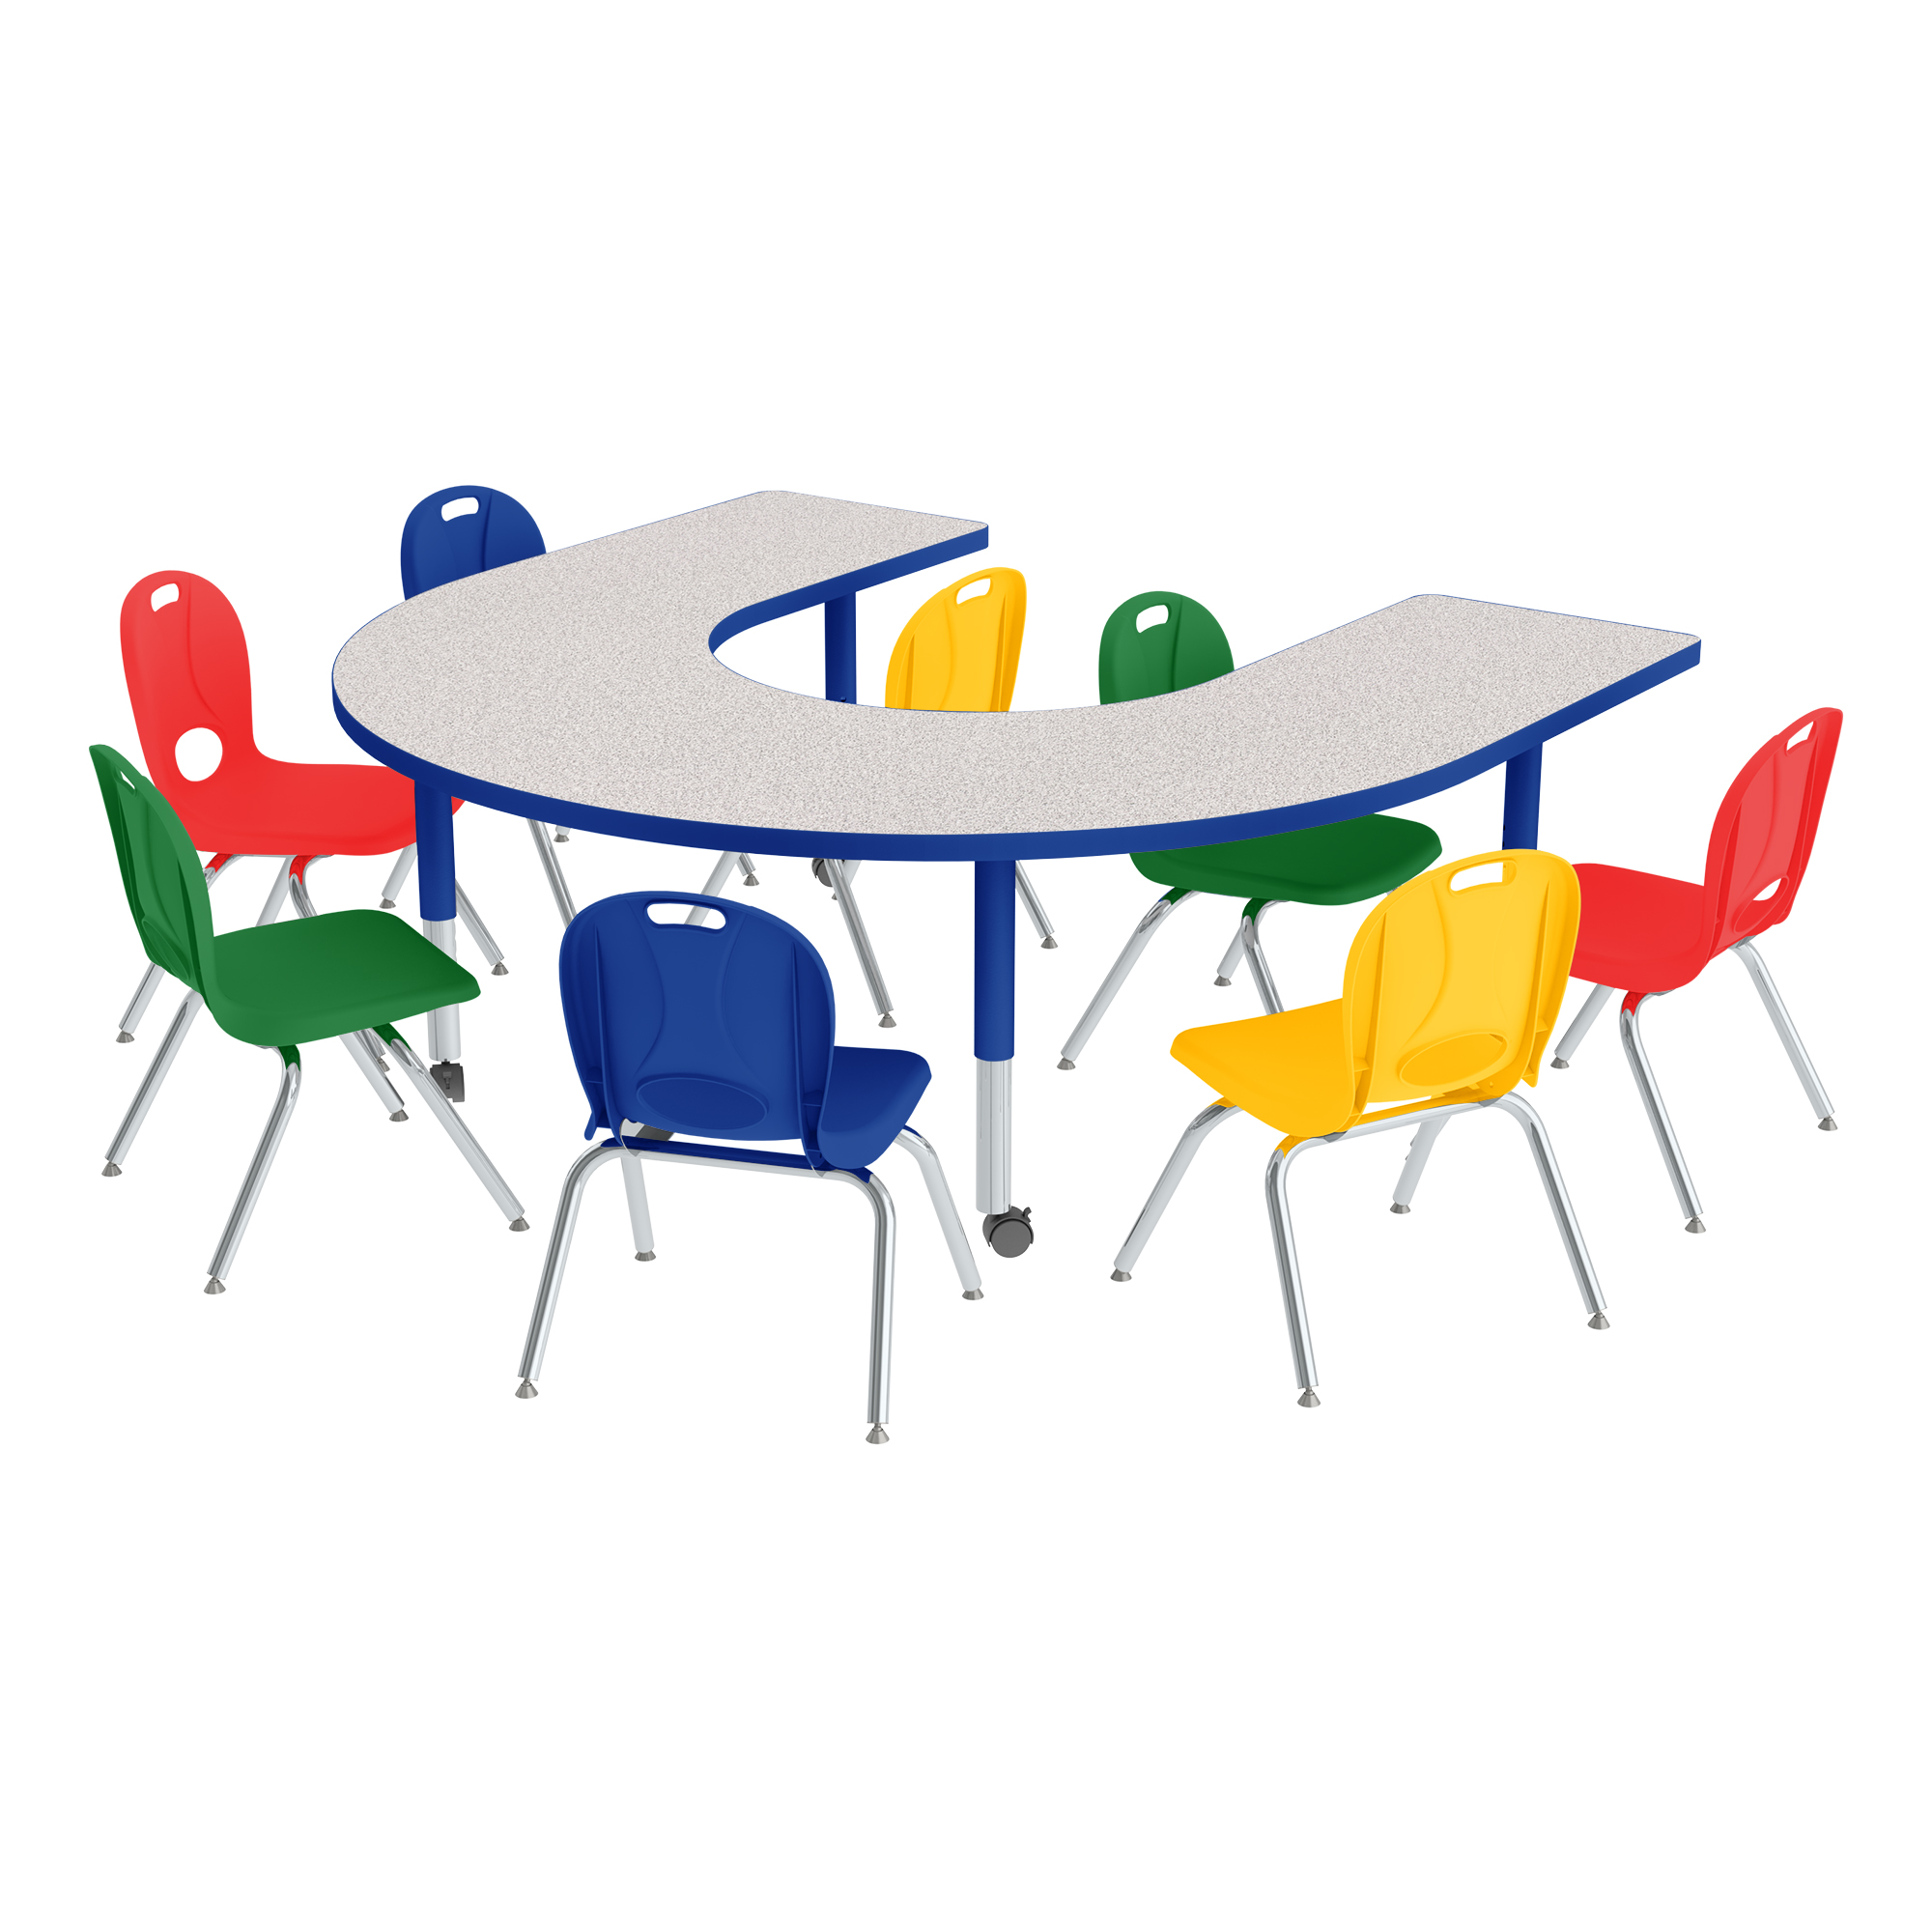 preschool table and chairs